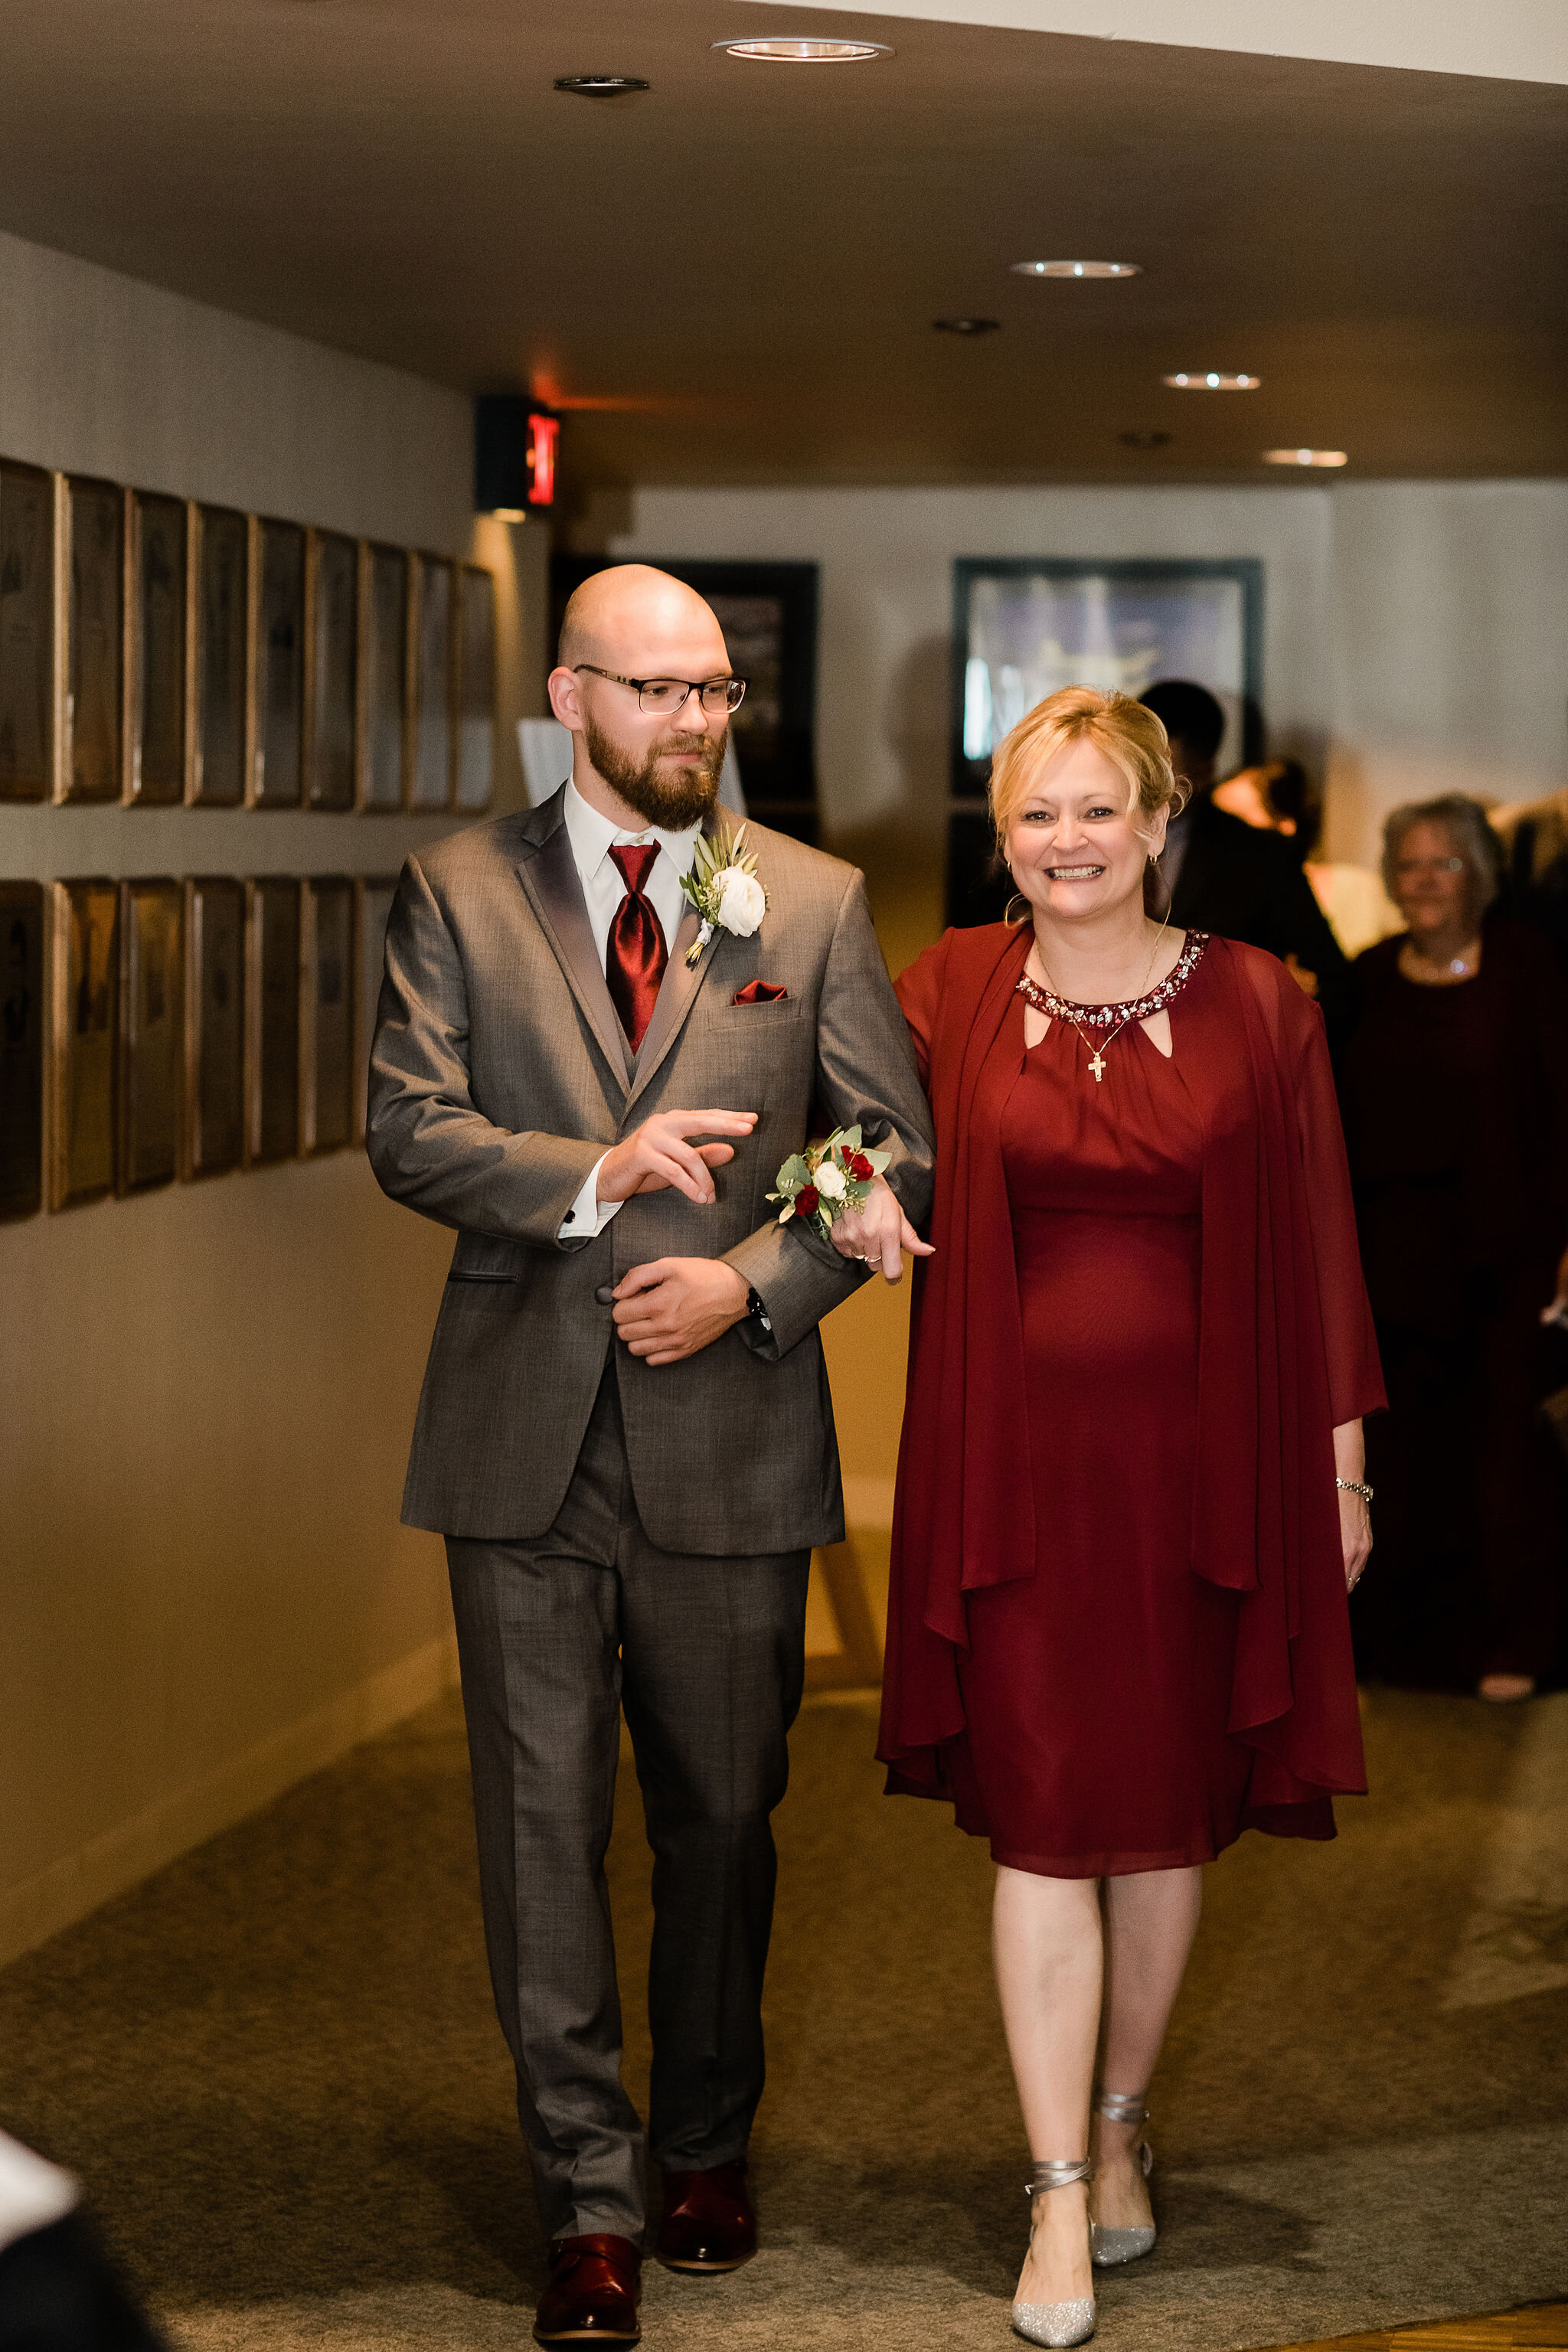 Groom walking in with his mom